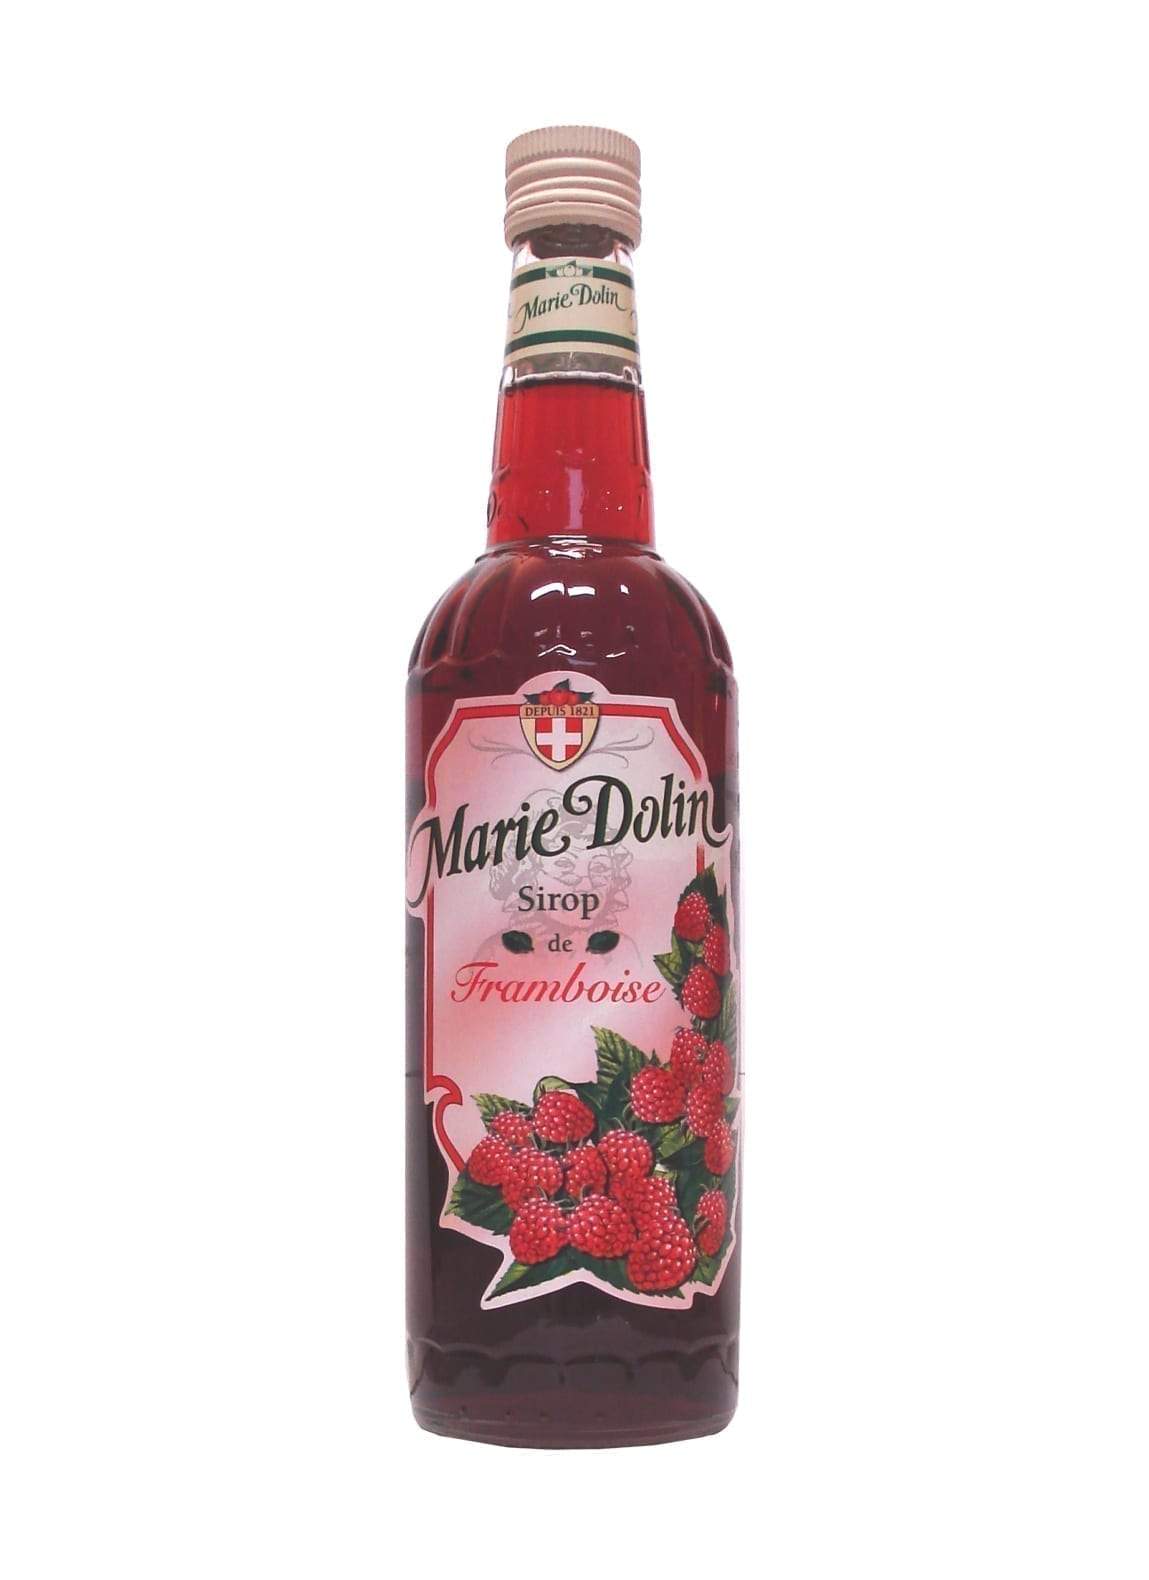 Marie Dolin Sirop de Framboise (Raspberry) Syrup 700ml | Syrup | Shop online at Spirits of France